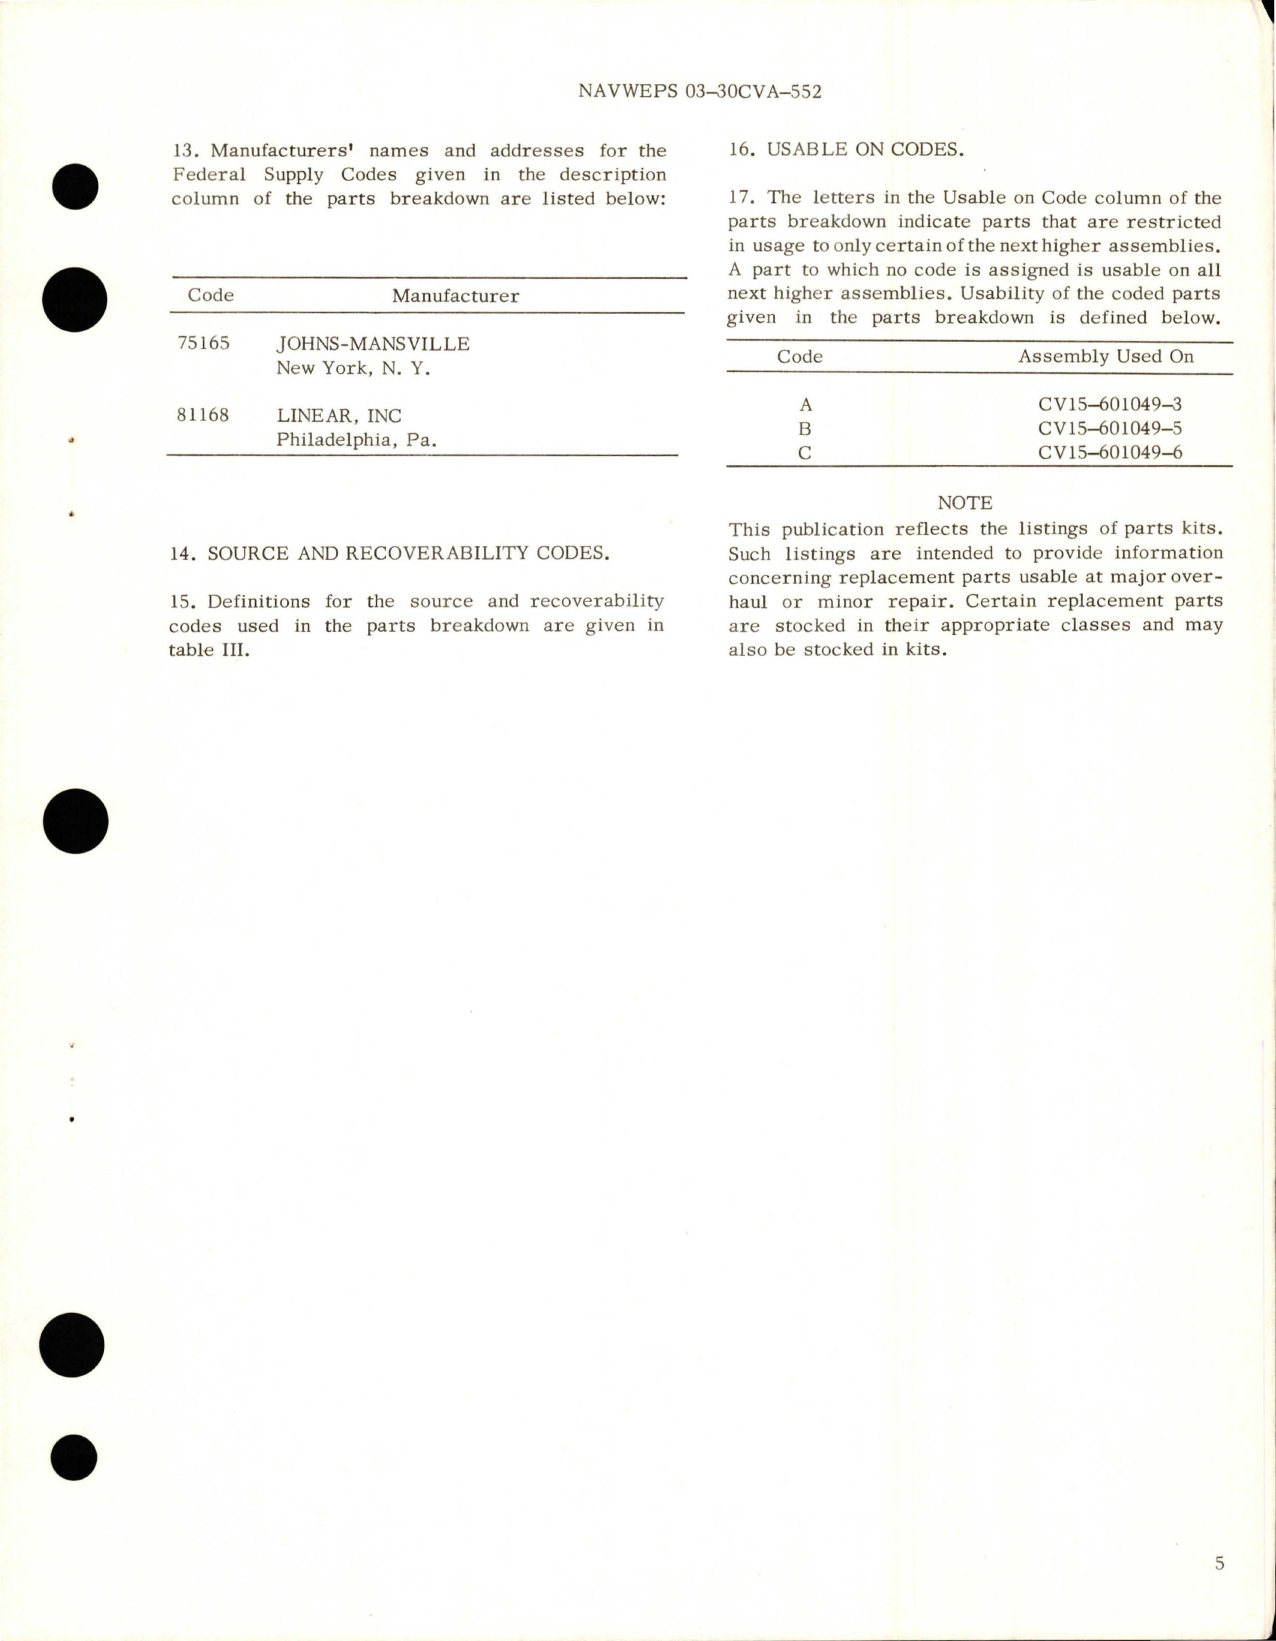 Sample page 5 from AirCorps Library document: Overhaul Instructions with Parts Breakdown for Arresting Gear Actuating Cylinder Assembly 